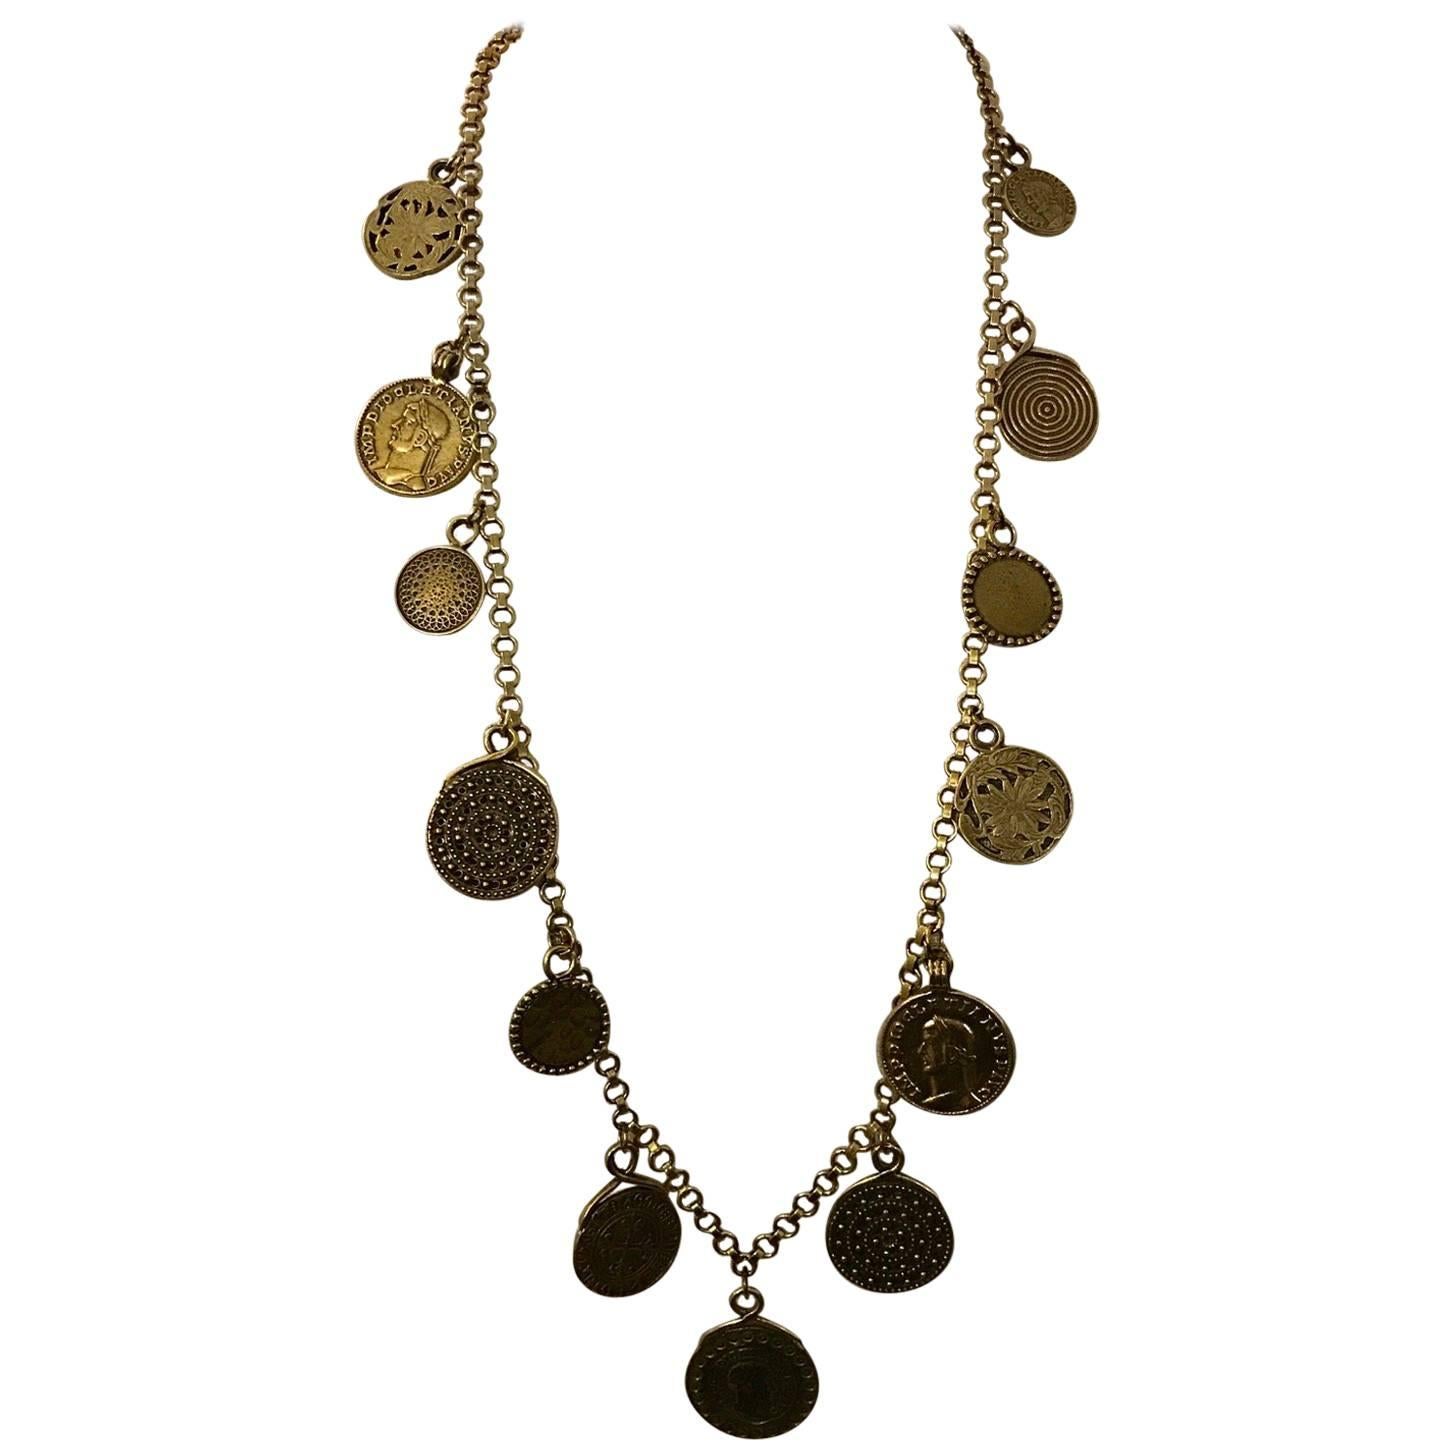 Yves Saint Laurent 1977 Gypsy Coin Medallian Gold Tone Necklace Single Strand